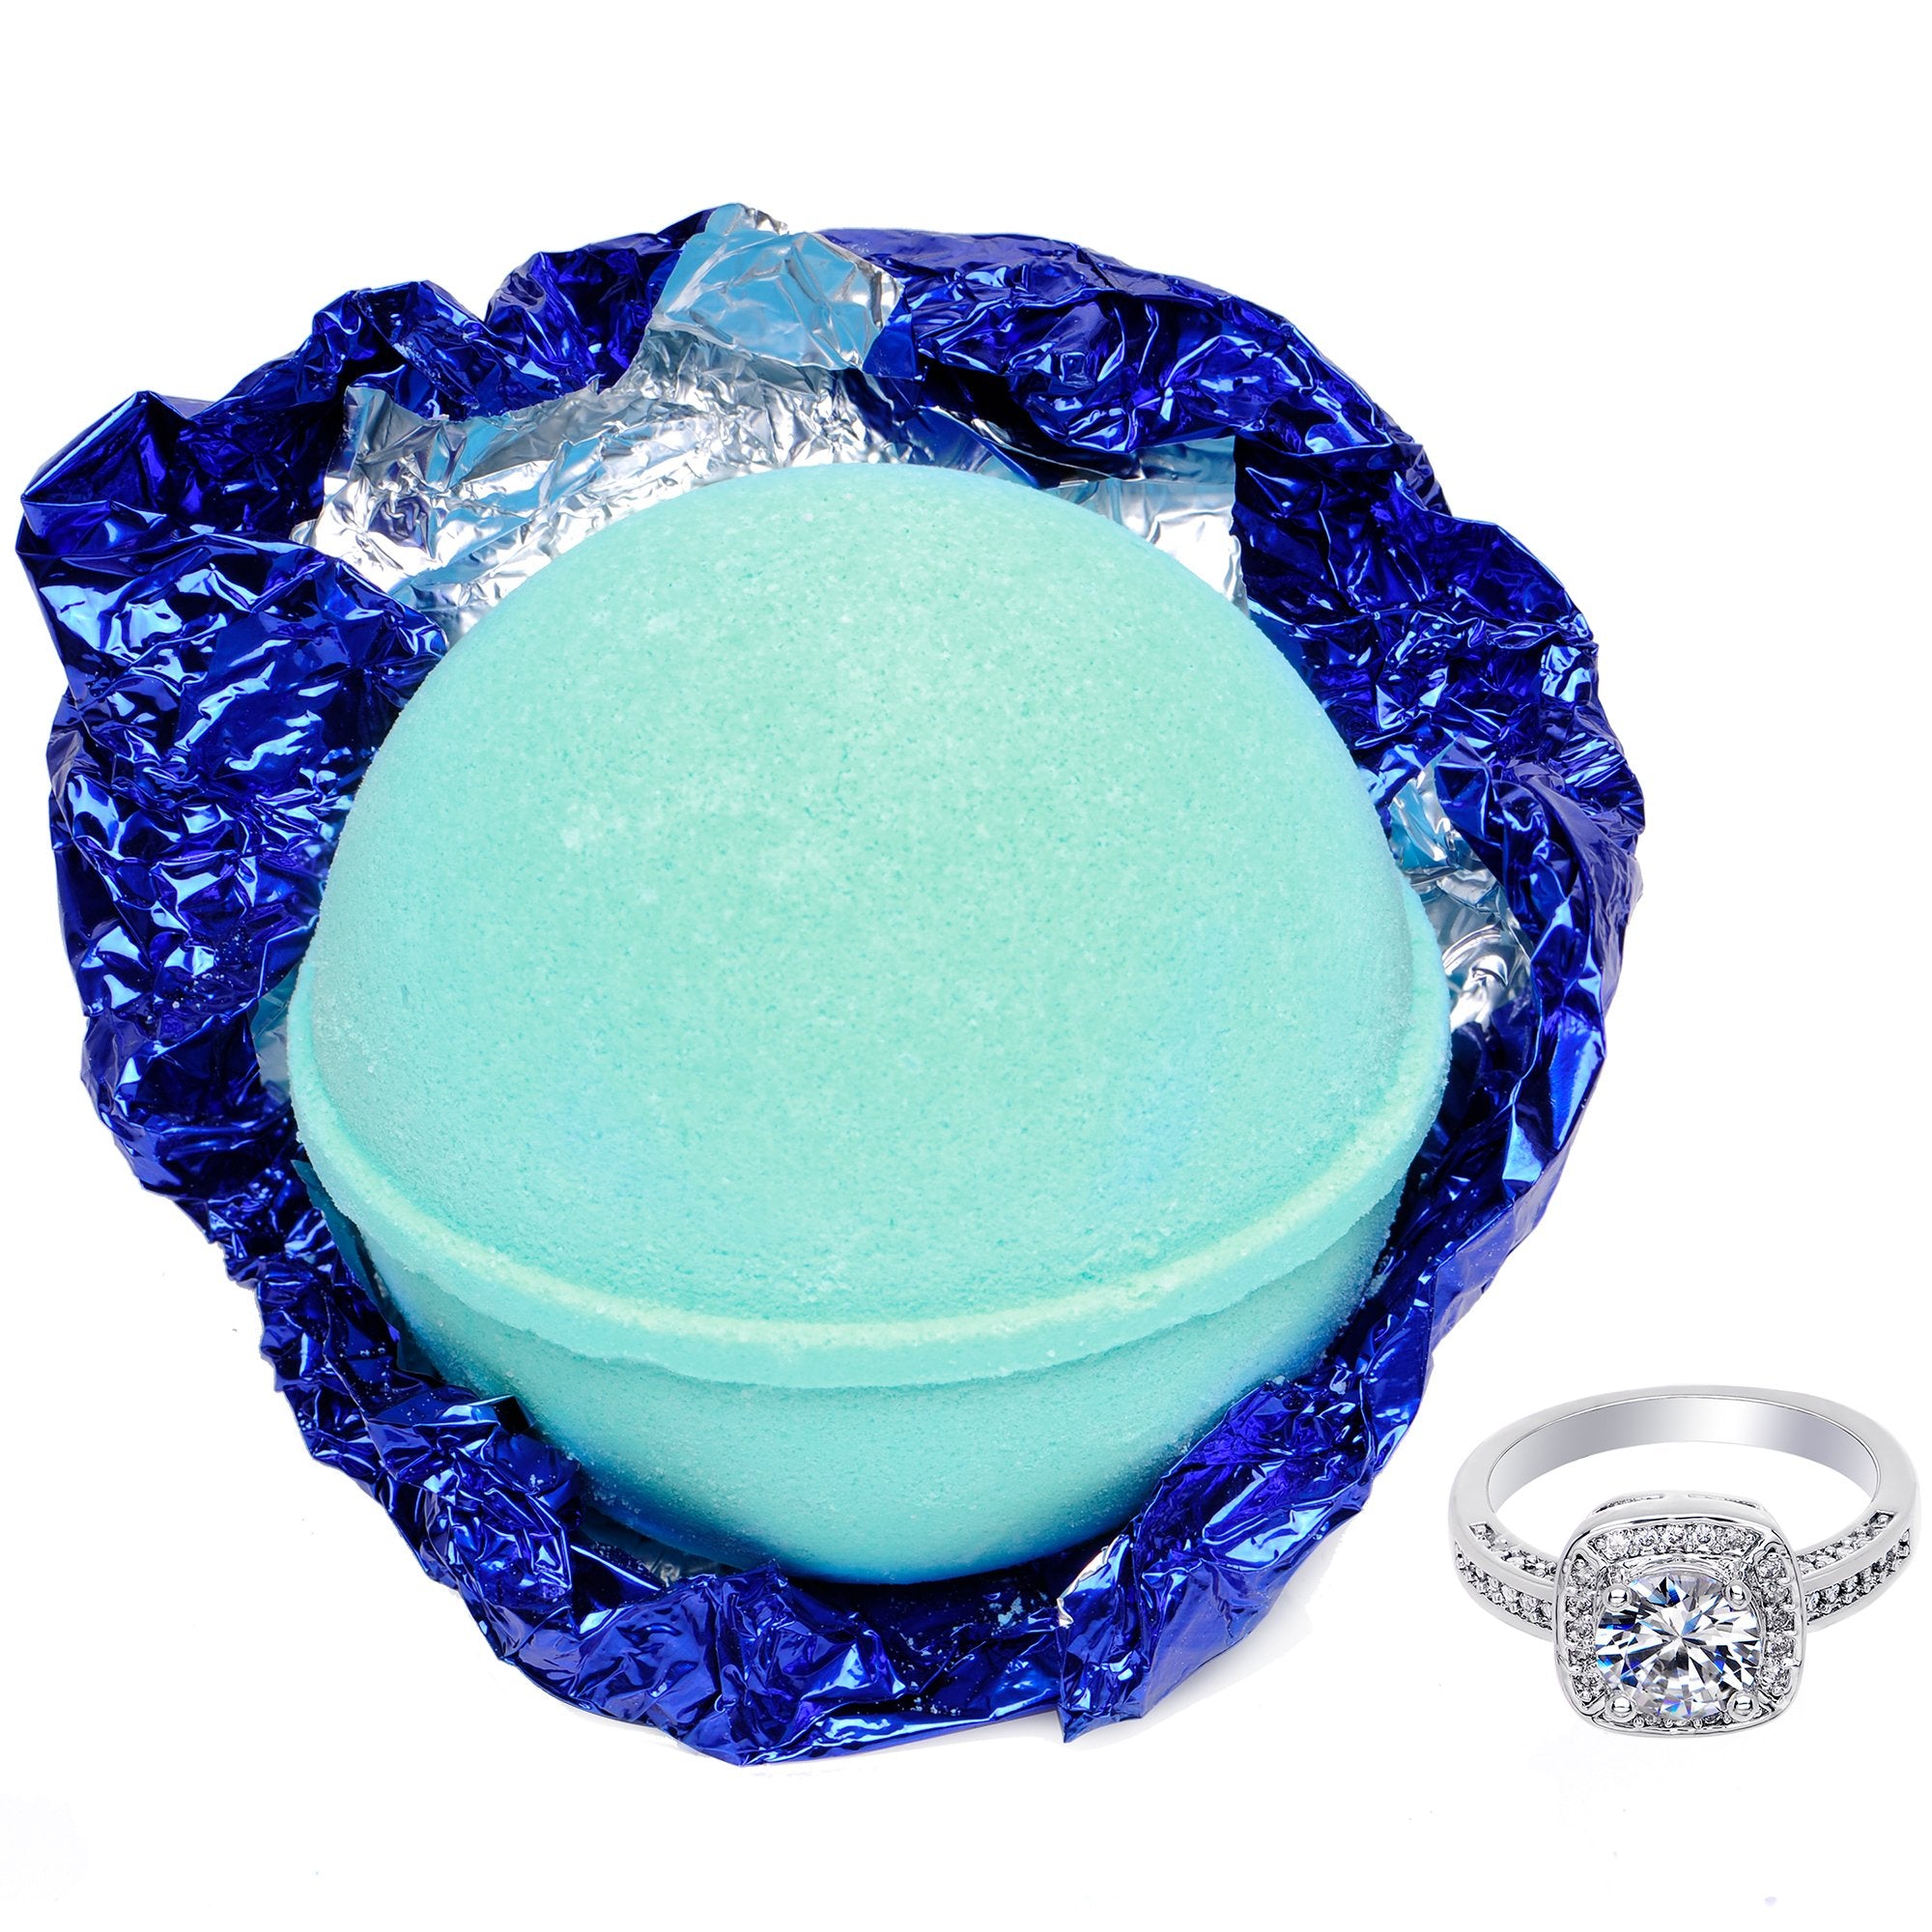 Tranquil Serenity Bath Bomb with Jewelry Ring Inside